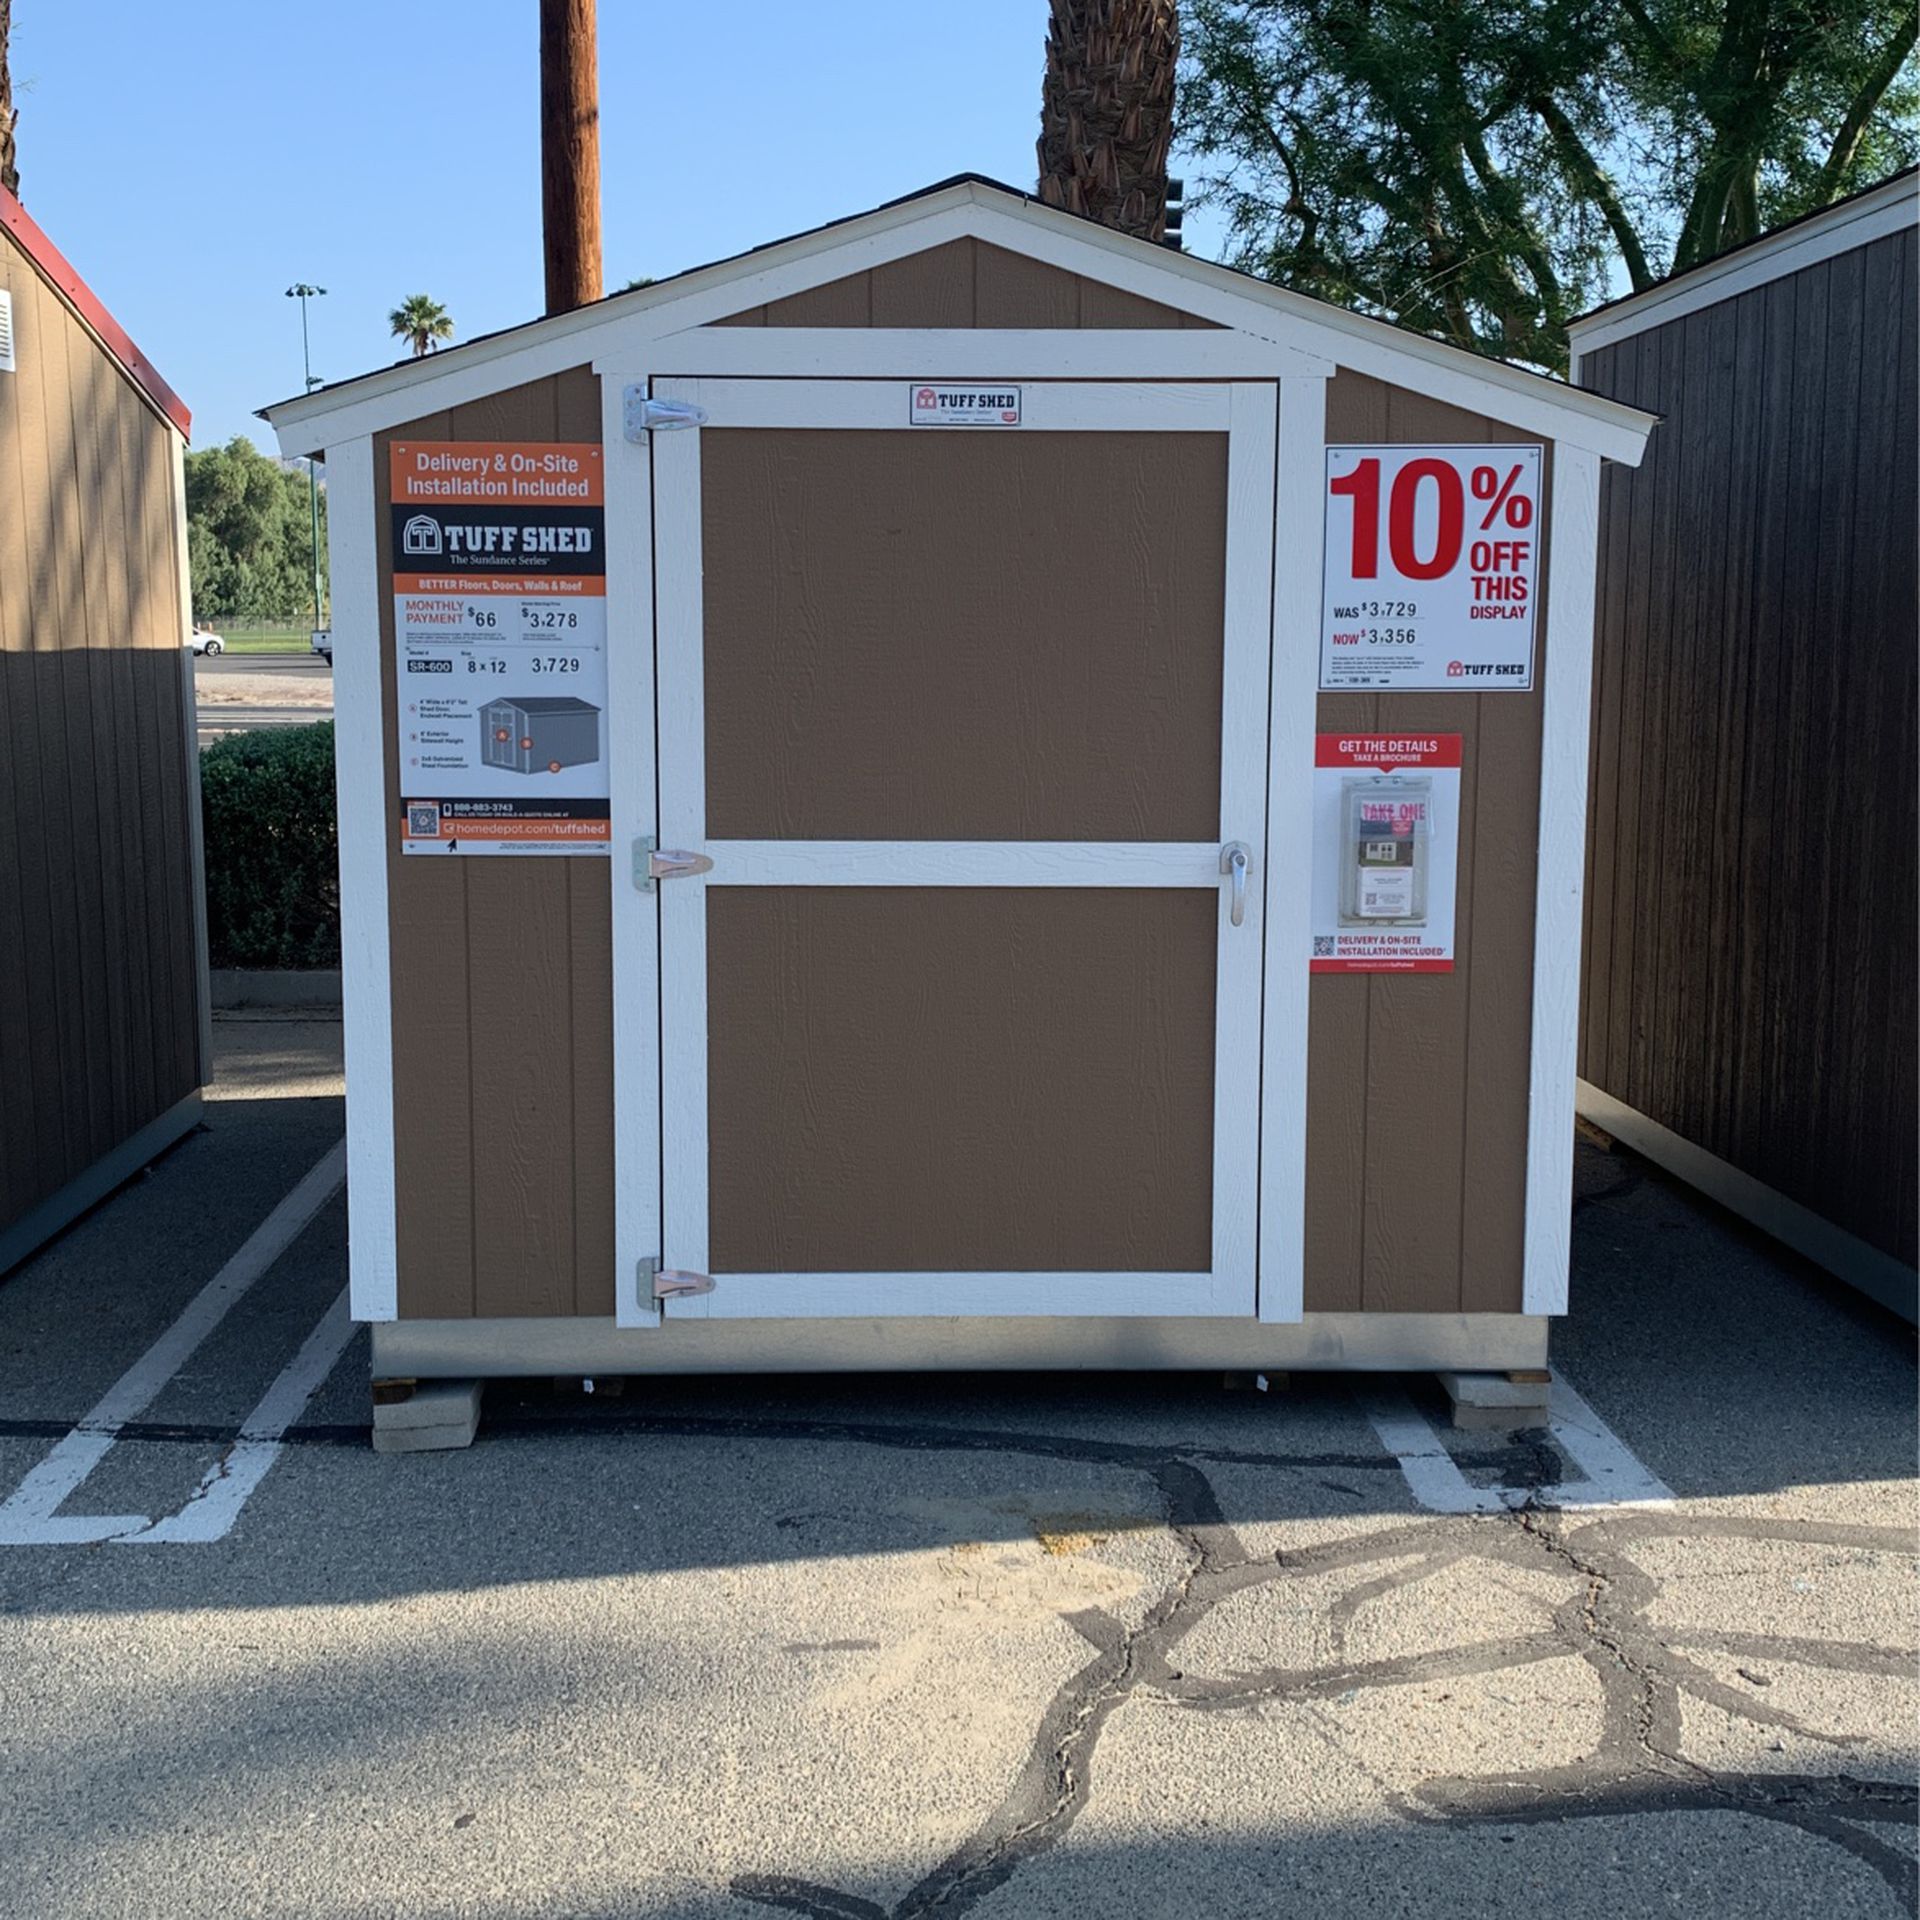 Tuff Shed Sundance SR-600 8x12 Was $3,729 Now $3,356 10% Off Financing Available!